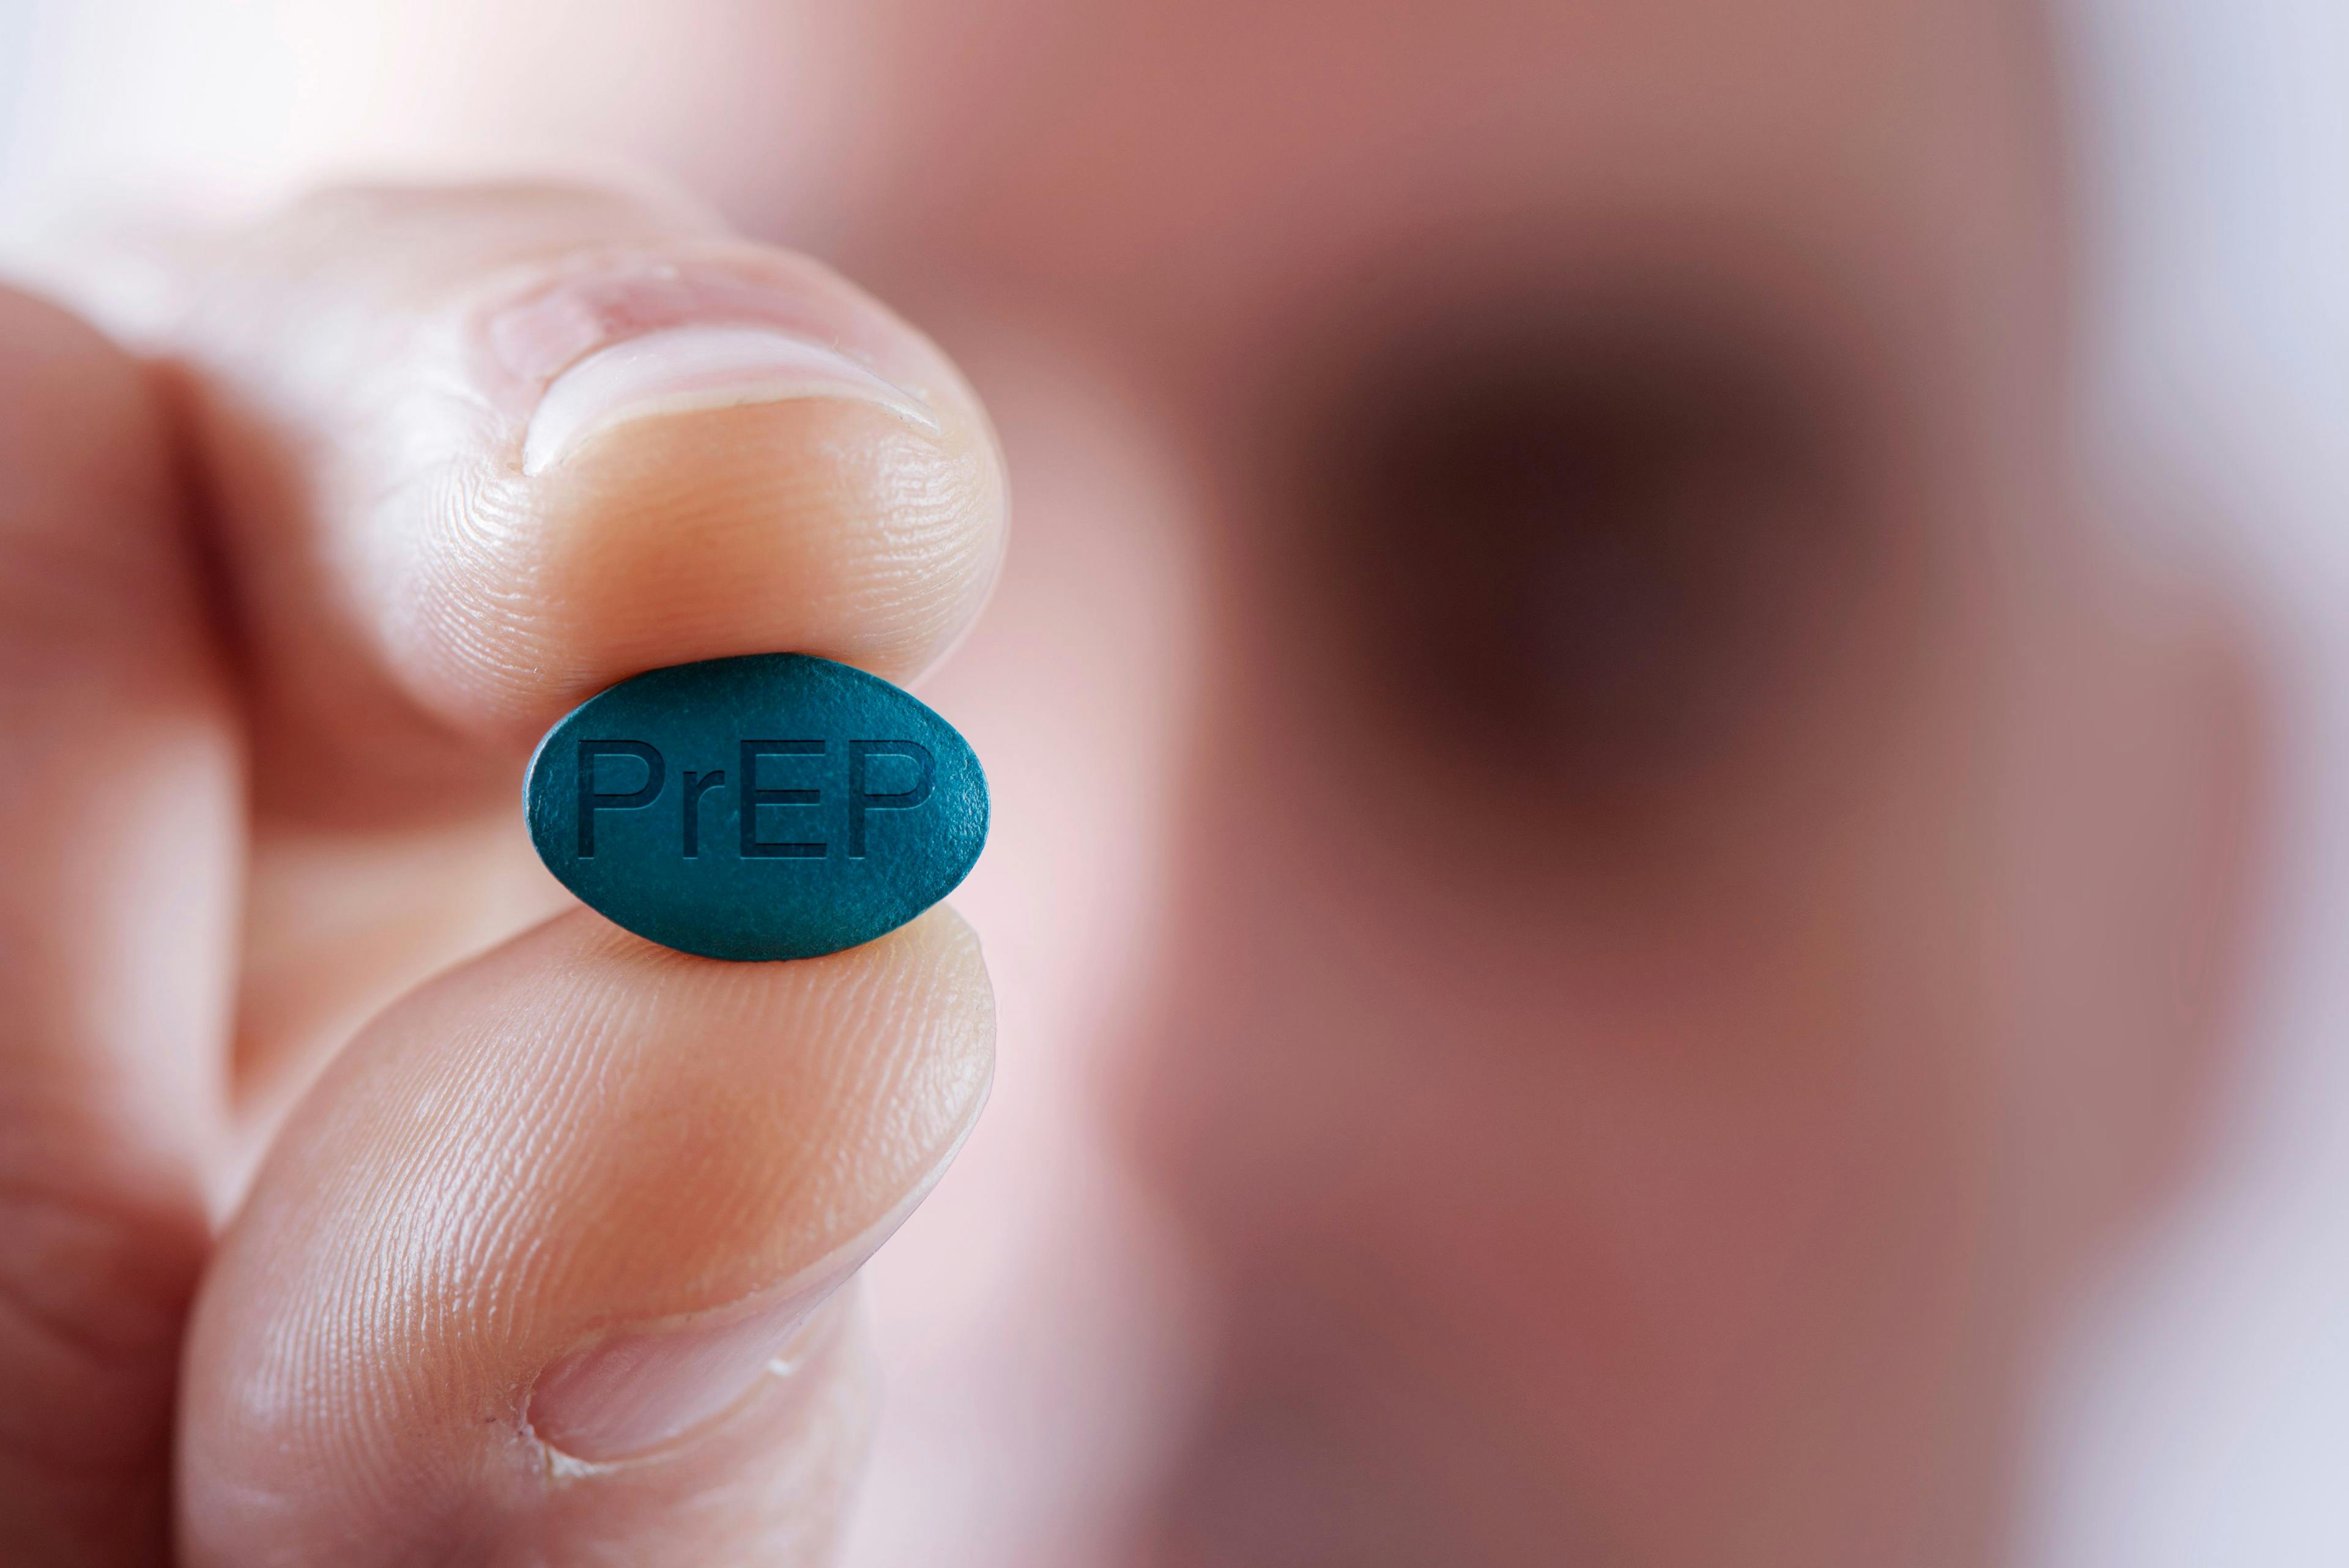 young man with a PrEP pill | Image Credit: nito - stock.adobe.com